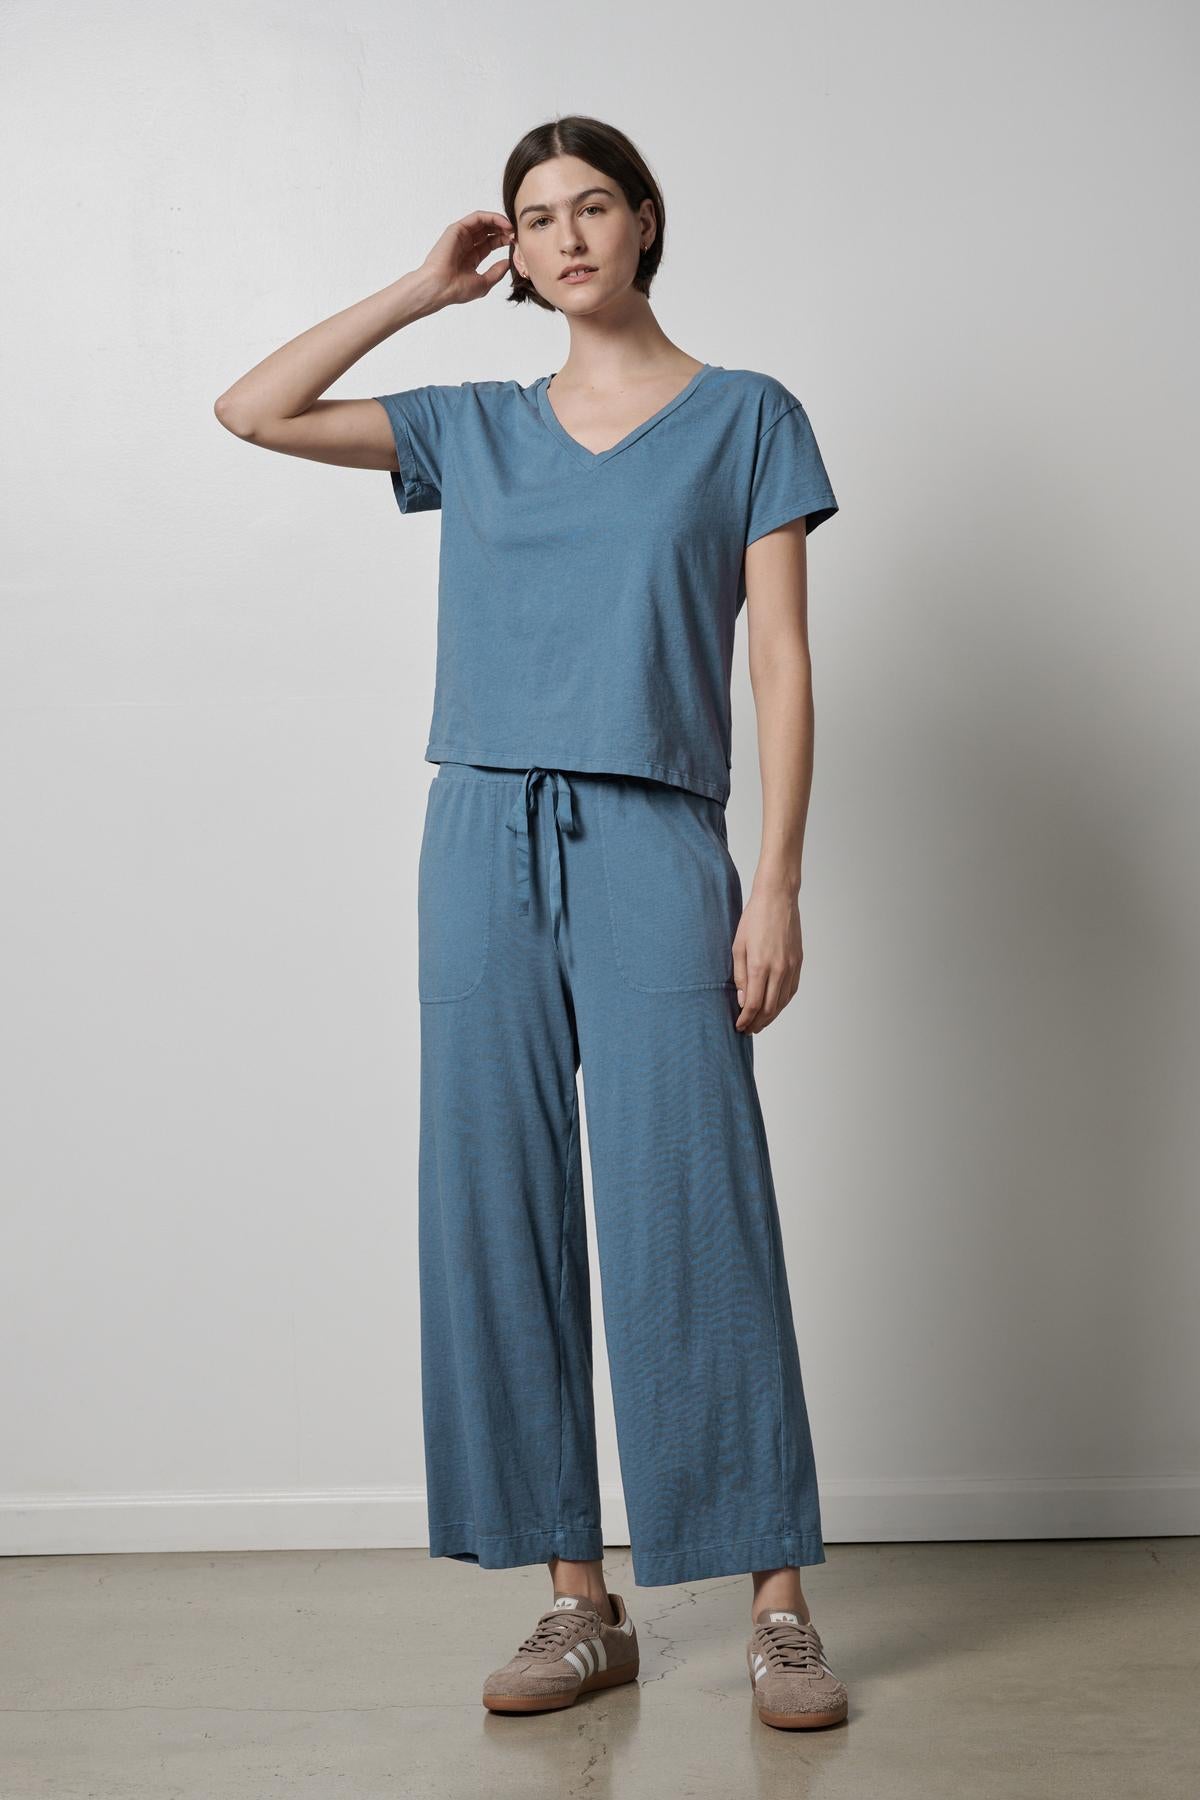 The model is wearing a blue PISMO PANT jumpsuit with slash pockets made of organic cotton by Velvet by Jenny Graham.-35496003829953